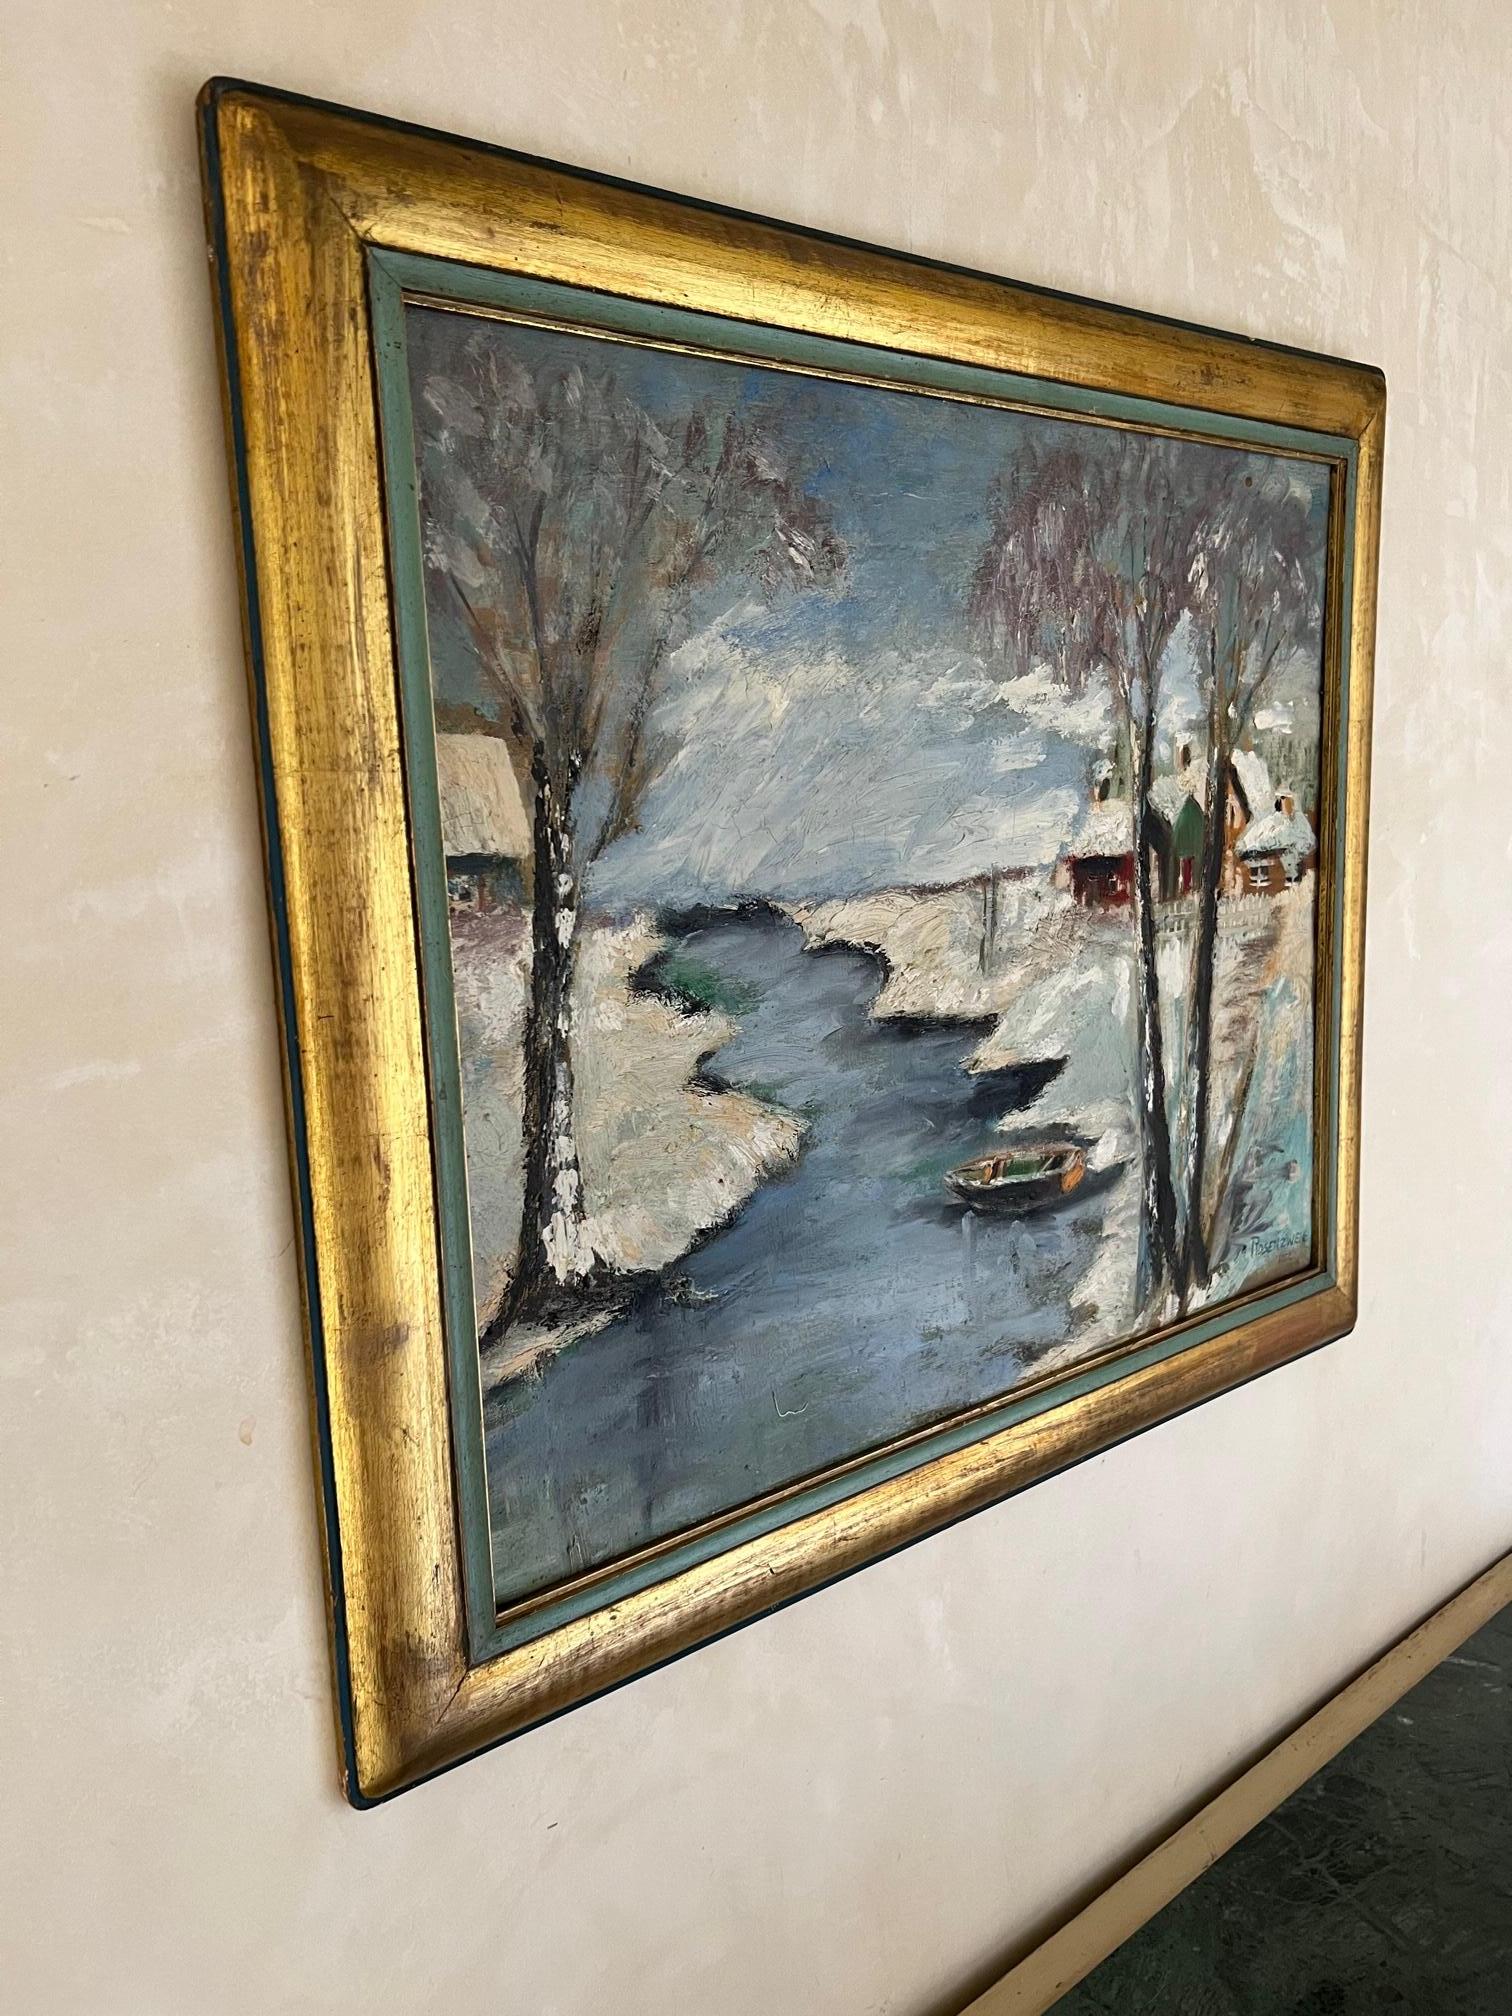 Winter landscape oil painting on board by listed American artist Irving Rosenzweig (1915-1983).
Signed Rosenzweig 1952.
Nicely framed in wooden frame painted gold and a greenish blue.

Painting dimensions 24 wide x 19.78 tall